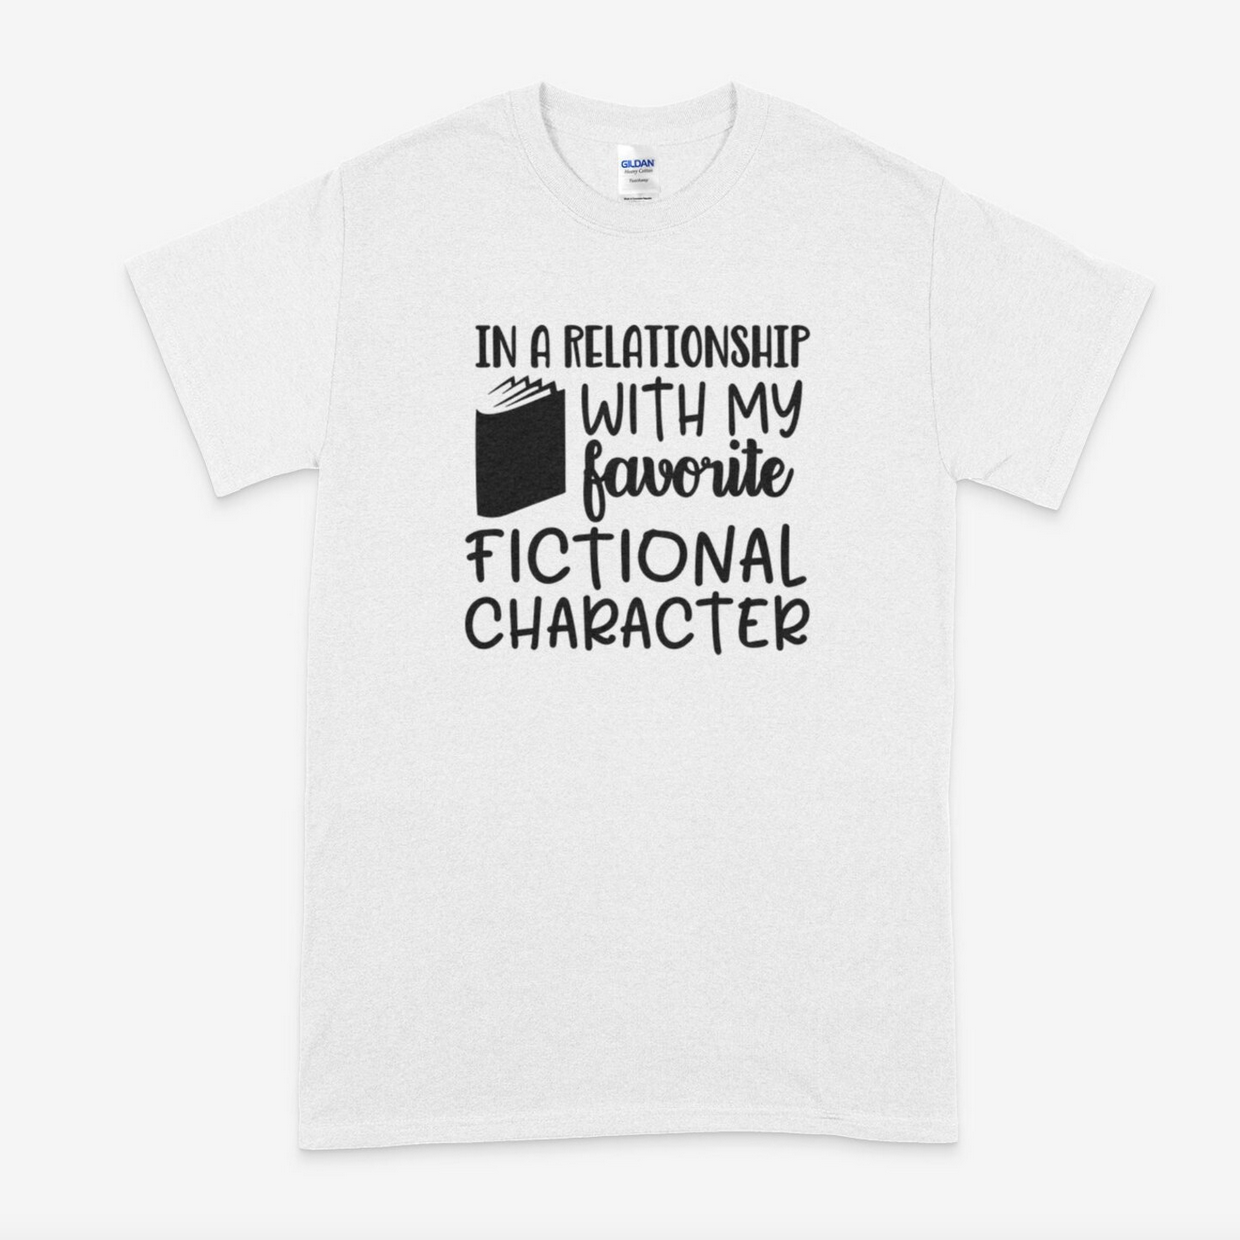 White shirt with black text that says, "In a relationship with my favorite fictional character"